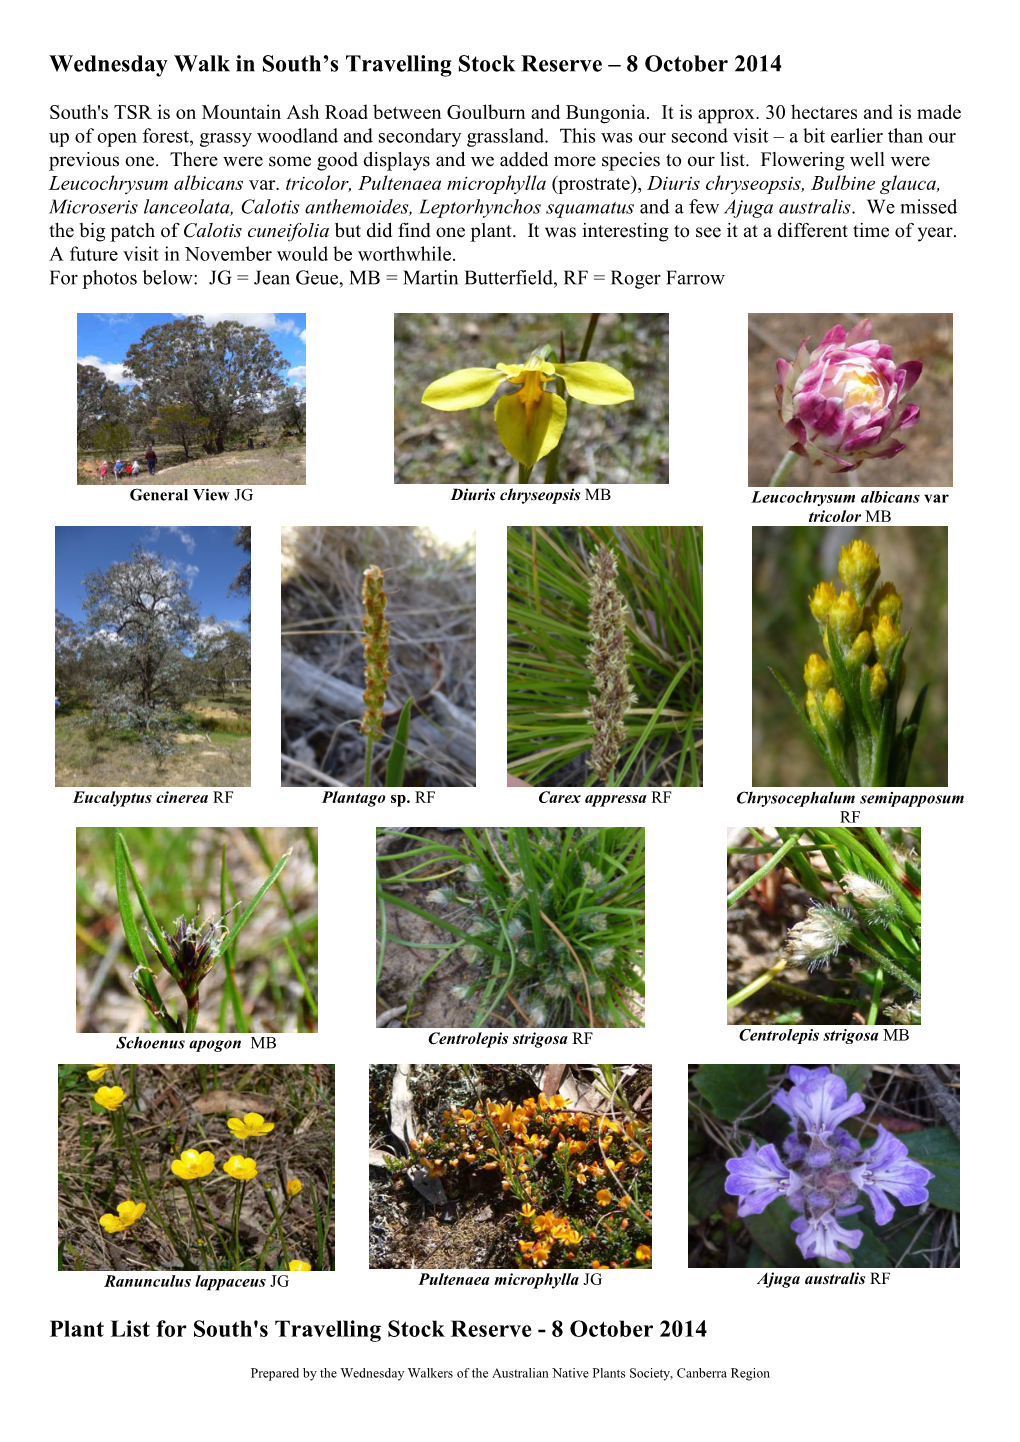 Plant List for South's Travelling Stock Reserve - 8 October 2014